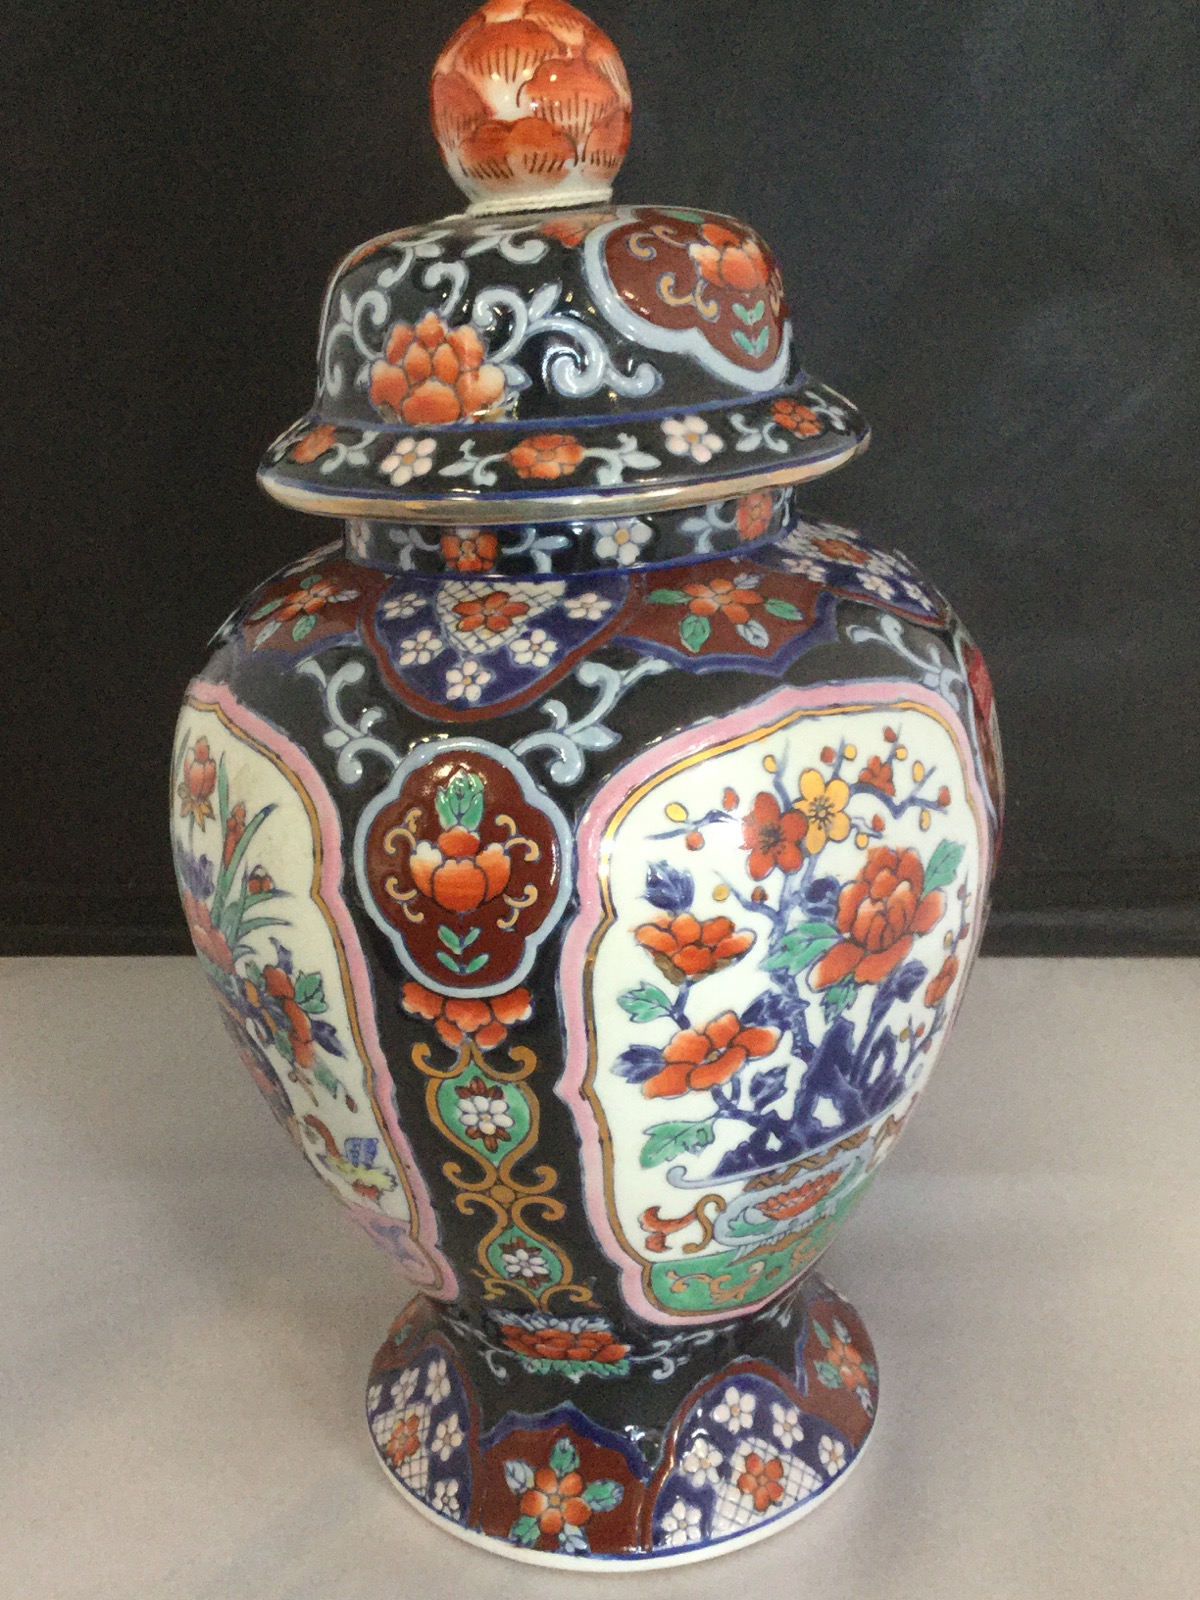 A Cantonese Imari style lidded jar with matching tapering vase, decorated with floral panels of - Image 2 of 3